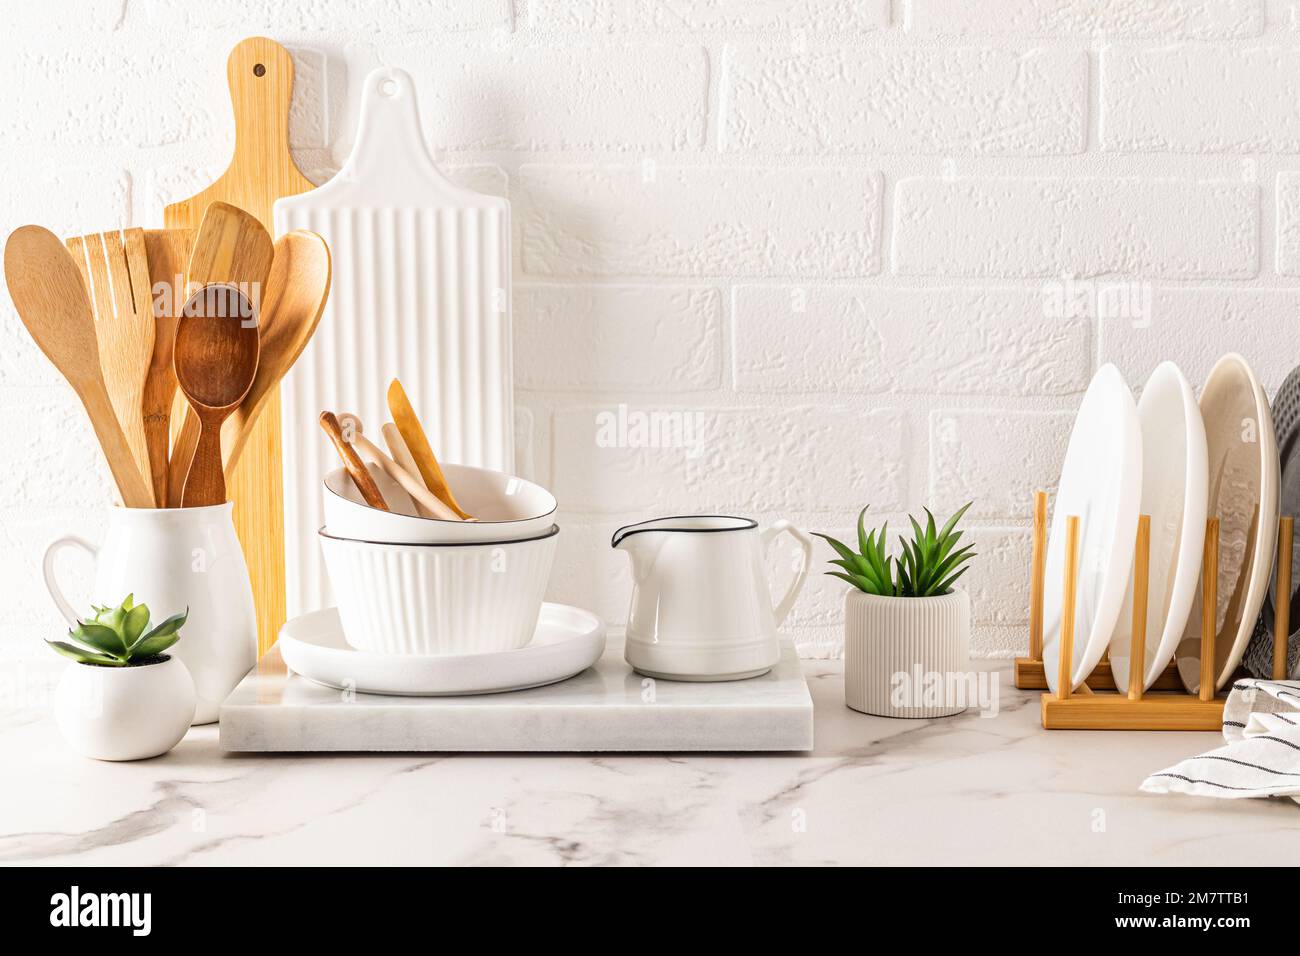 White ceramic utensils and kitchen utensils on a wooden countertop